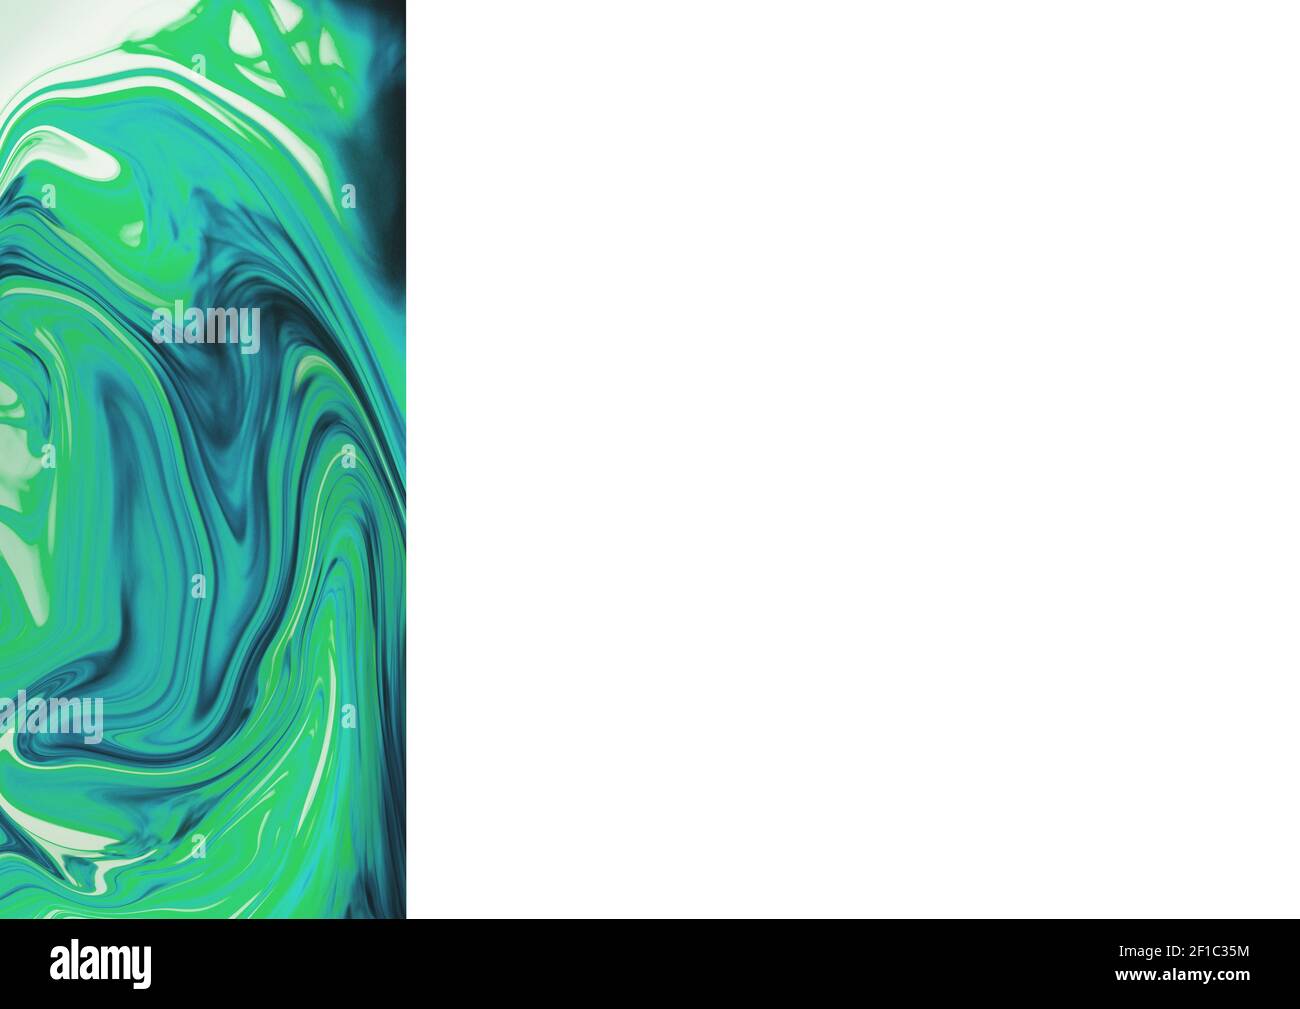 Composition of shiny green liquid paint swirl image with large white copy space to right Stock Photo